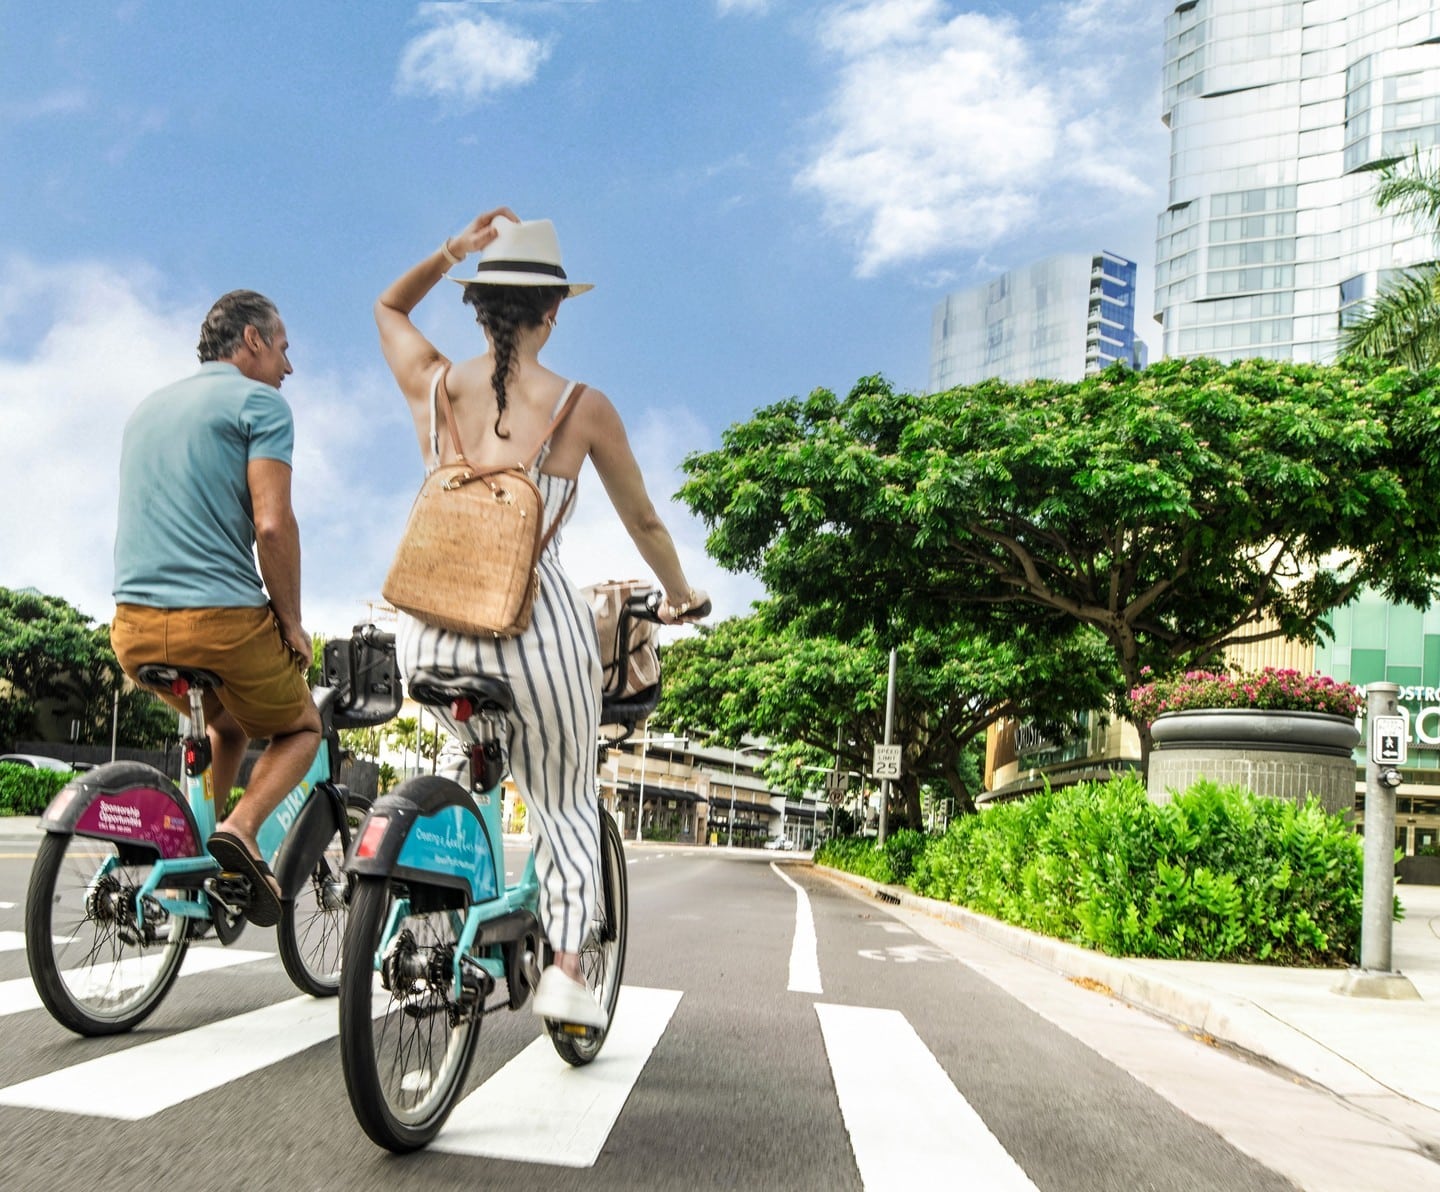 Explore the neighborhood on two wheels! With convenient bike racks and @gobikihi stations, take your time shopping, dining and relaxing in the boutiques, eateries and parks around every corner.